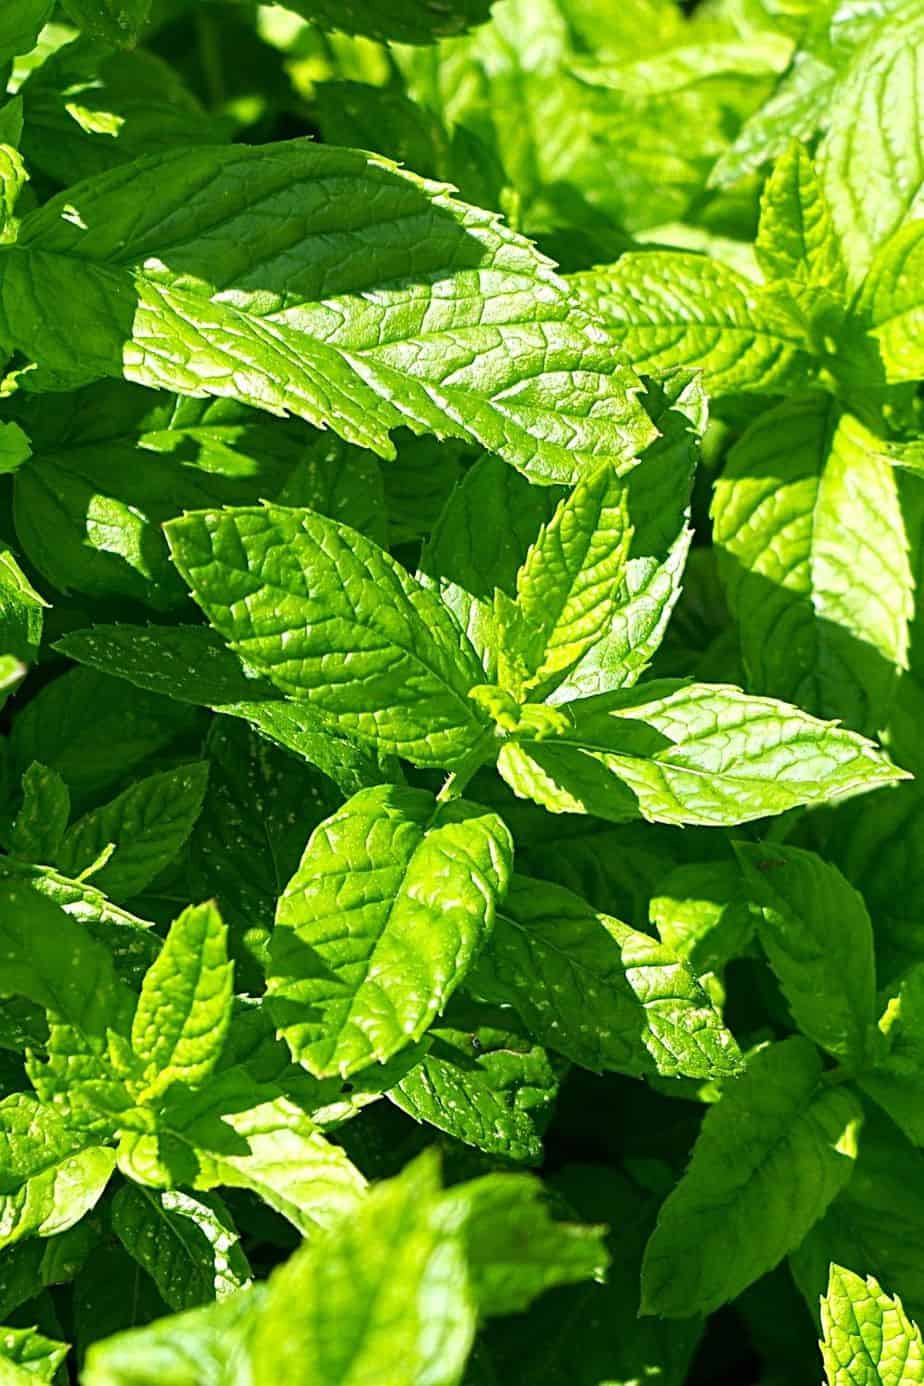 If you expose your Mint plant to extremely high temperatures, its leaves will get burned